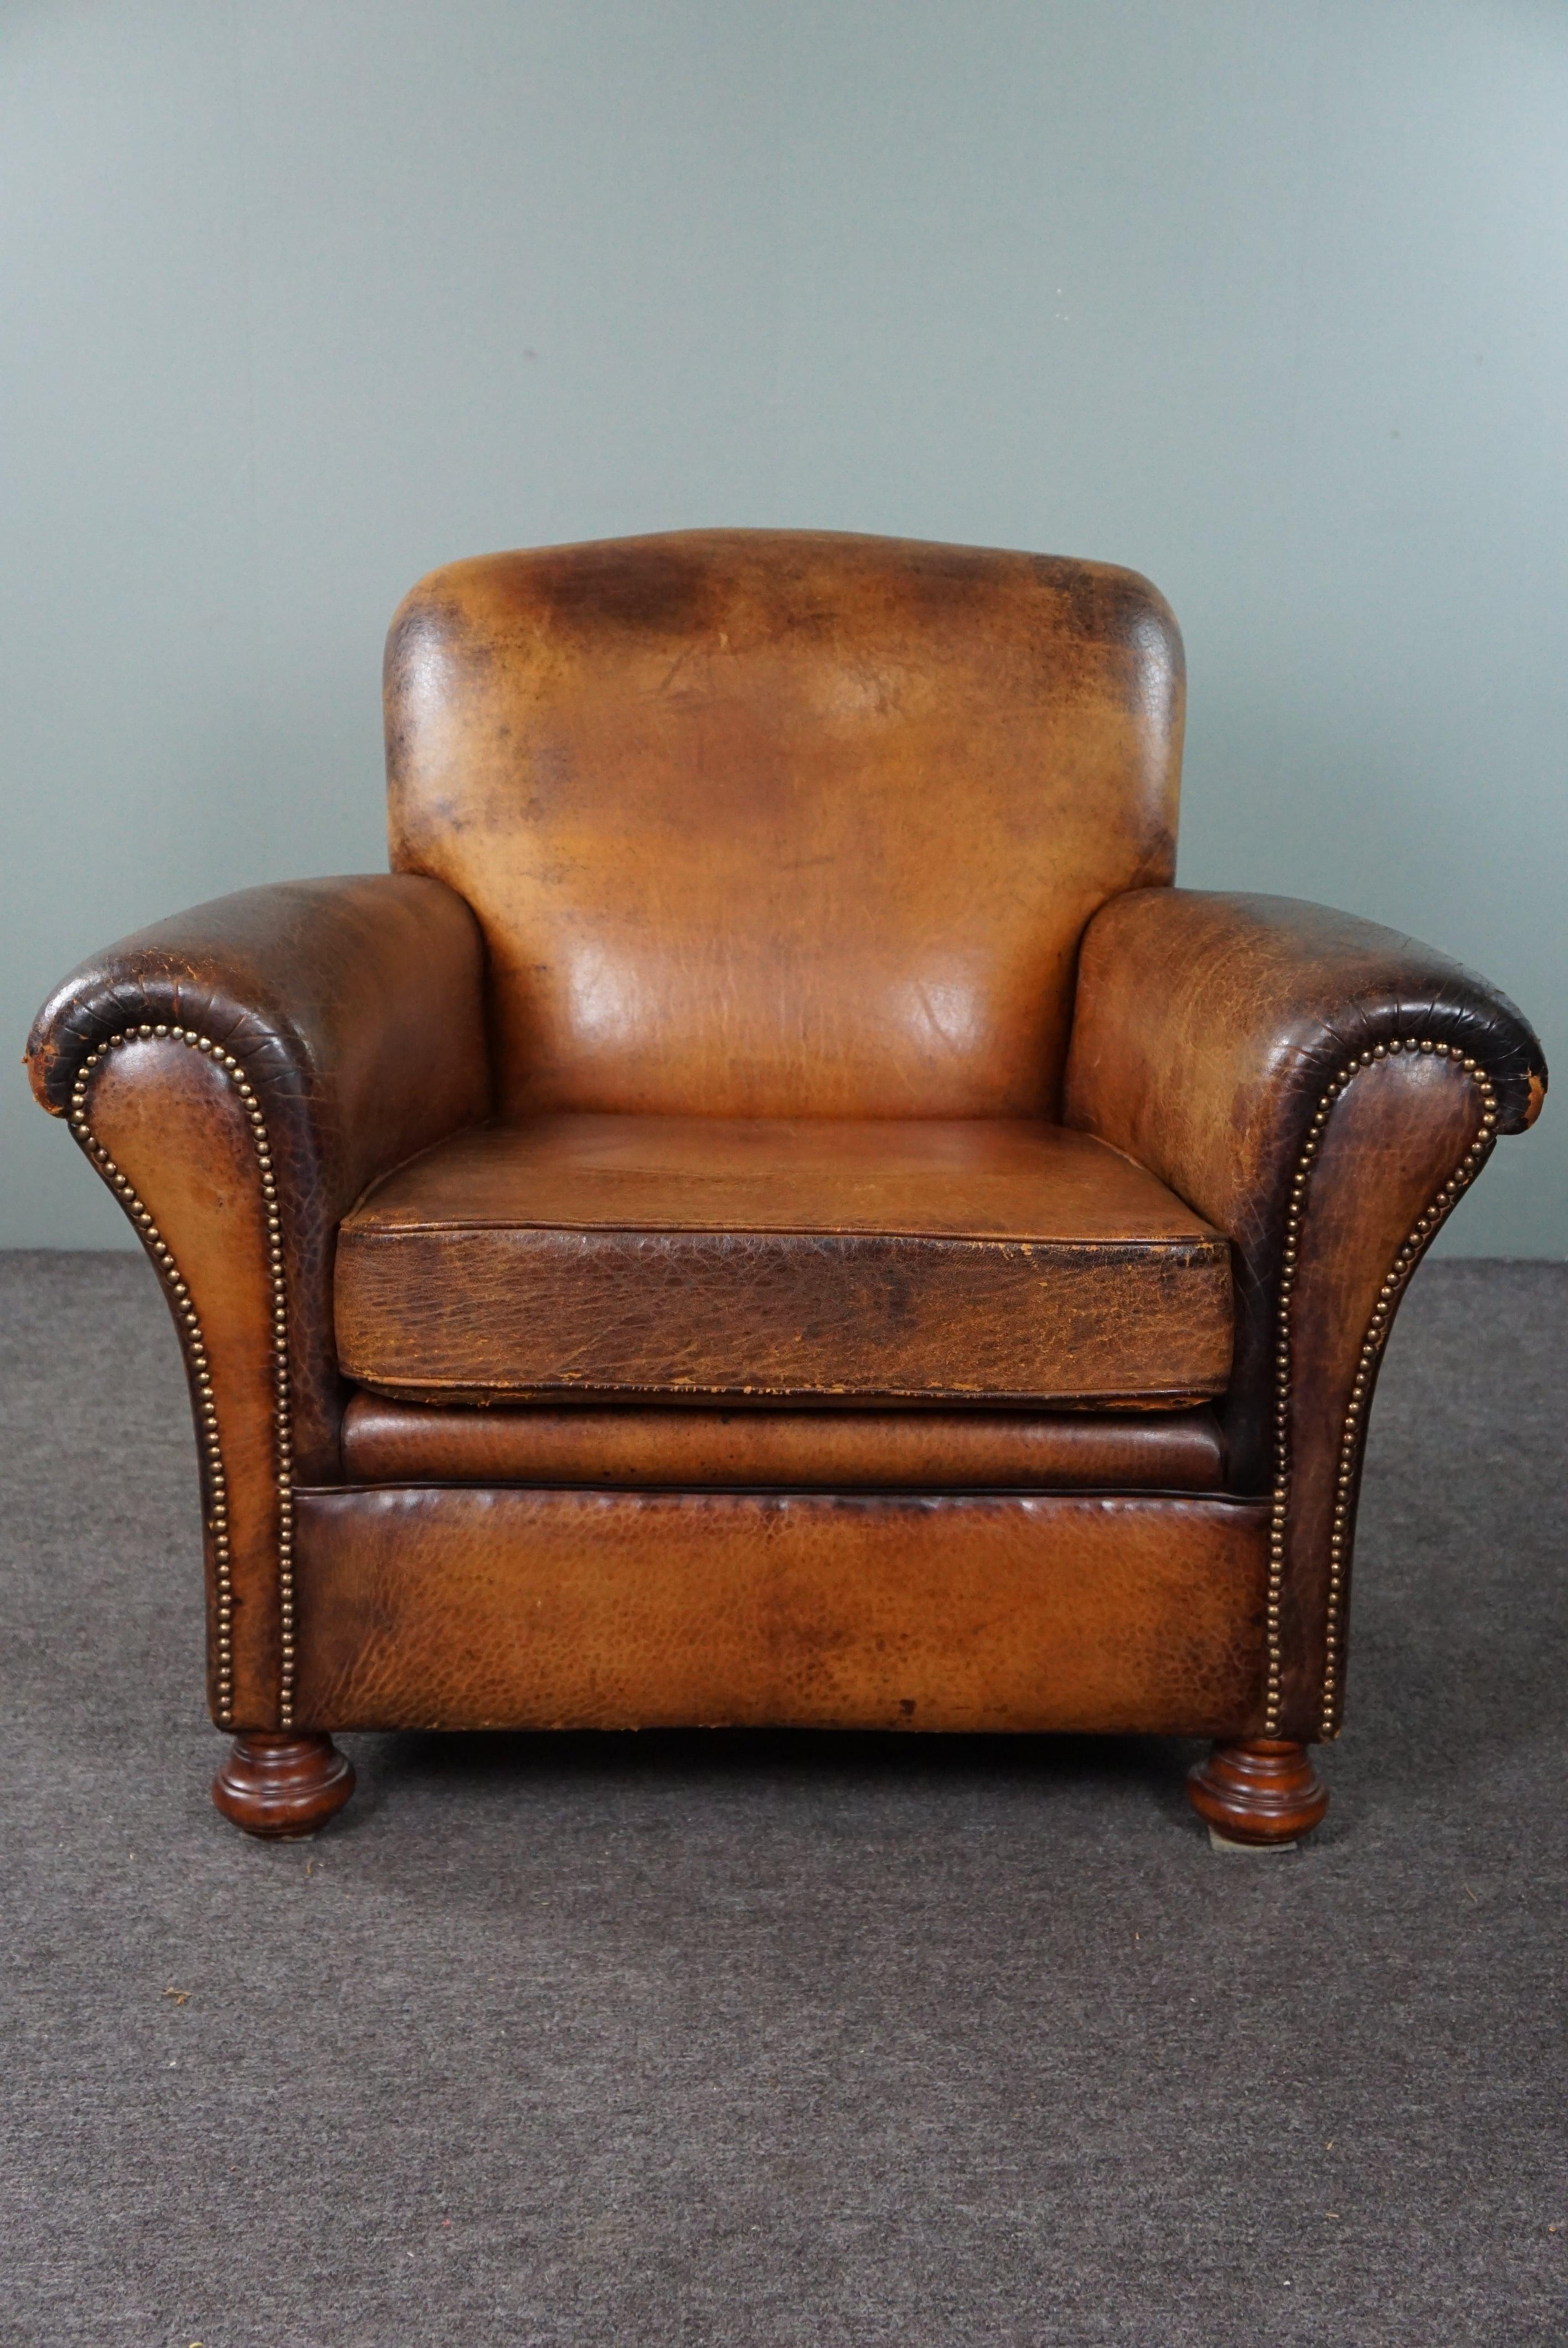 Offered is this armchair exudes character. This stunning sheep leather armchair offers a seating experience that few can match.
But it's not just the comfort that sets this armchair apart; its appearance and acquired patina from experience make it a